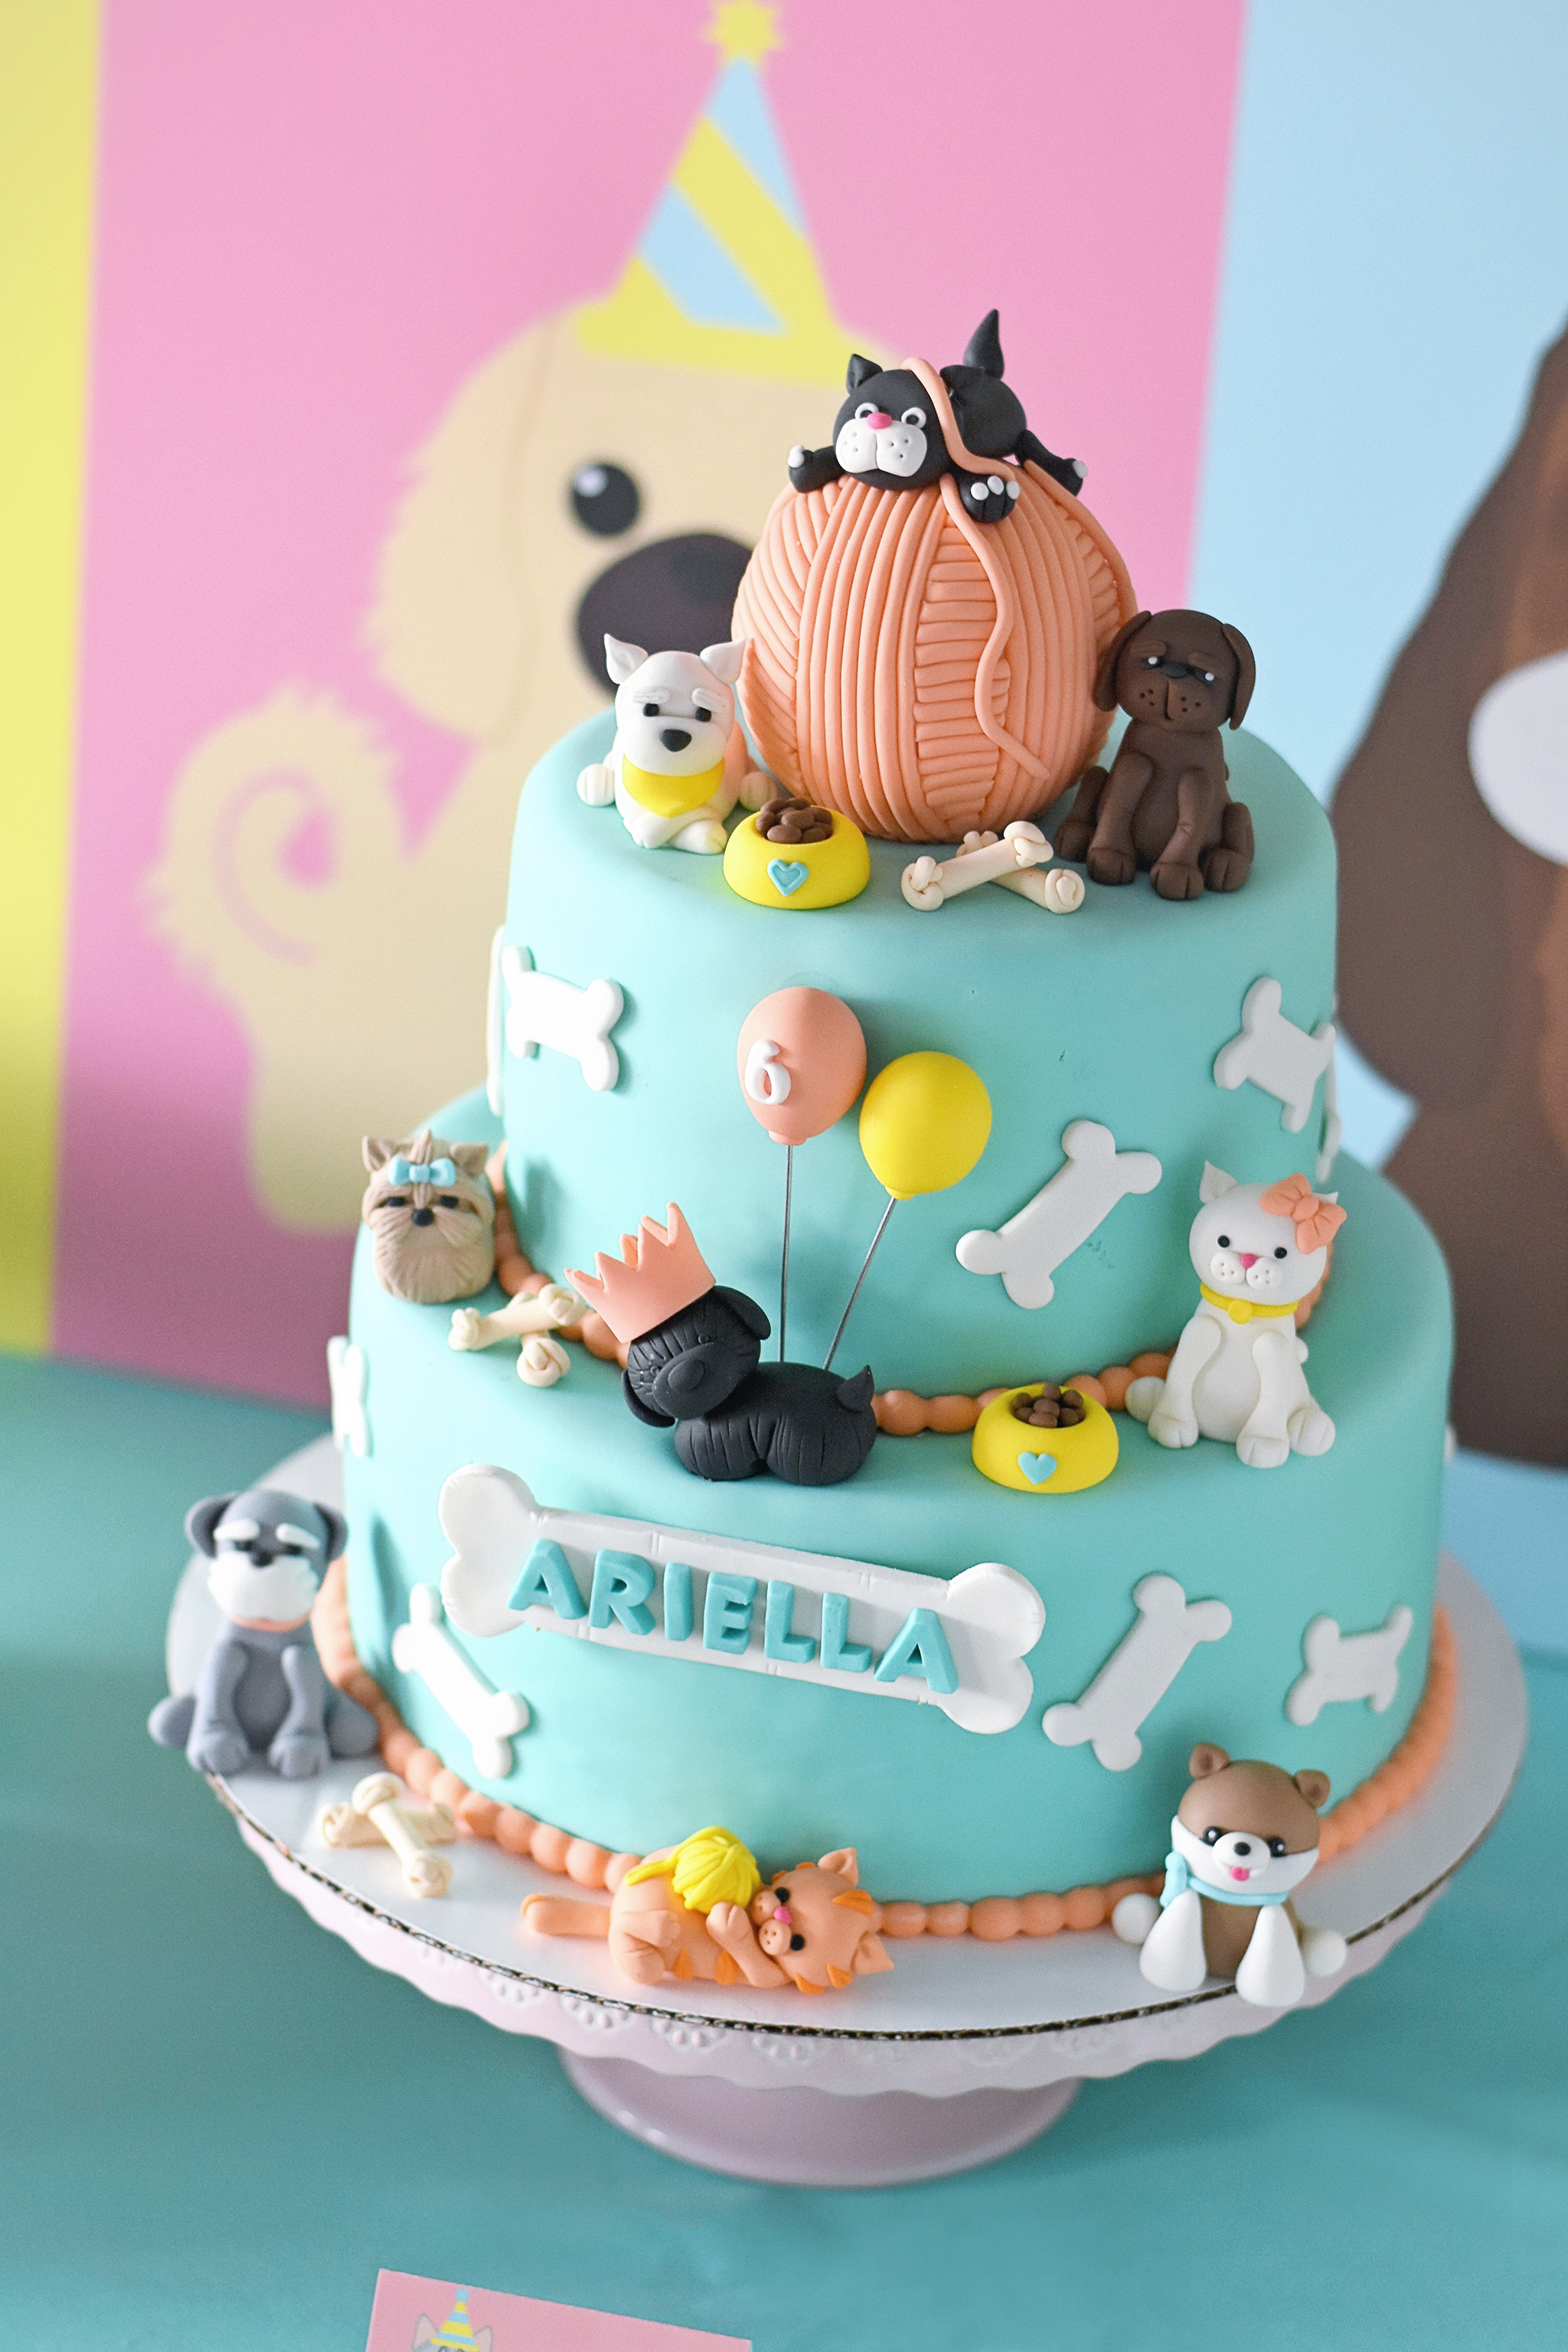 This cake is the Cat's Meow!